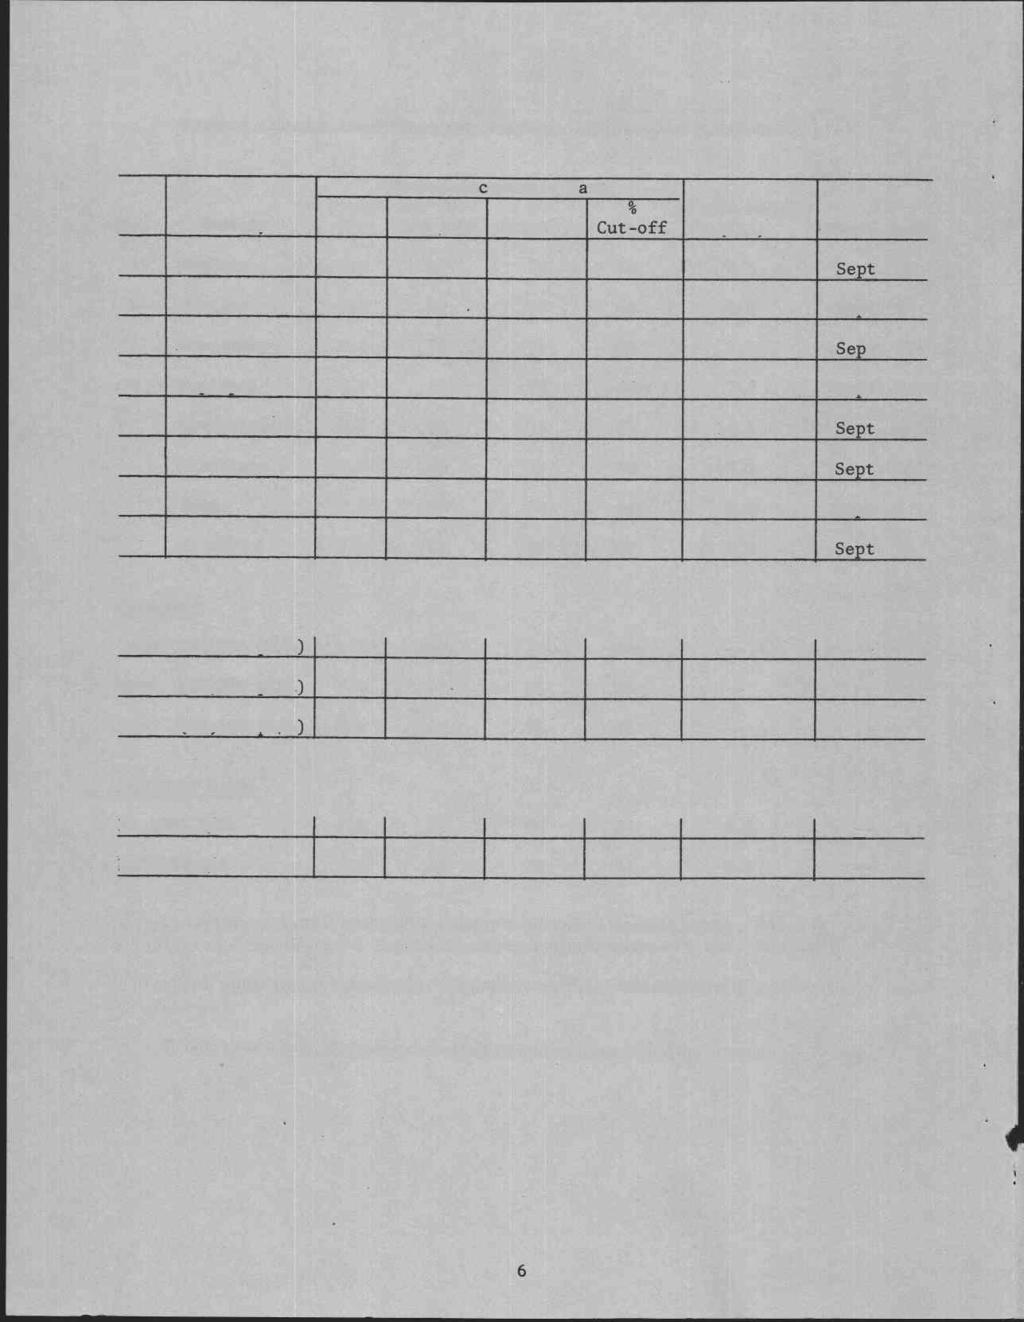 Table 4. Sweet Corn Nitrogen, Variety, Spacing Test, Summary, 19751 No. Variety Yield 1/A Husked Ac ceptable E ars Ear Wt. % Lbs./Ear Moisture % Cut-off Plant Height (ft.) Harv. Date 1 Fanfare 6.8.